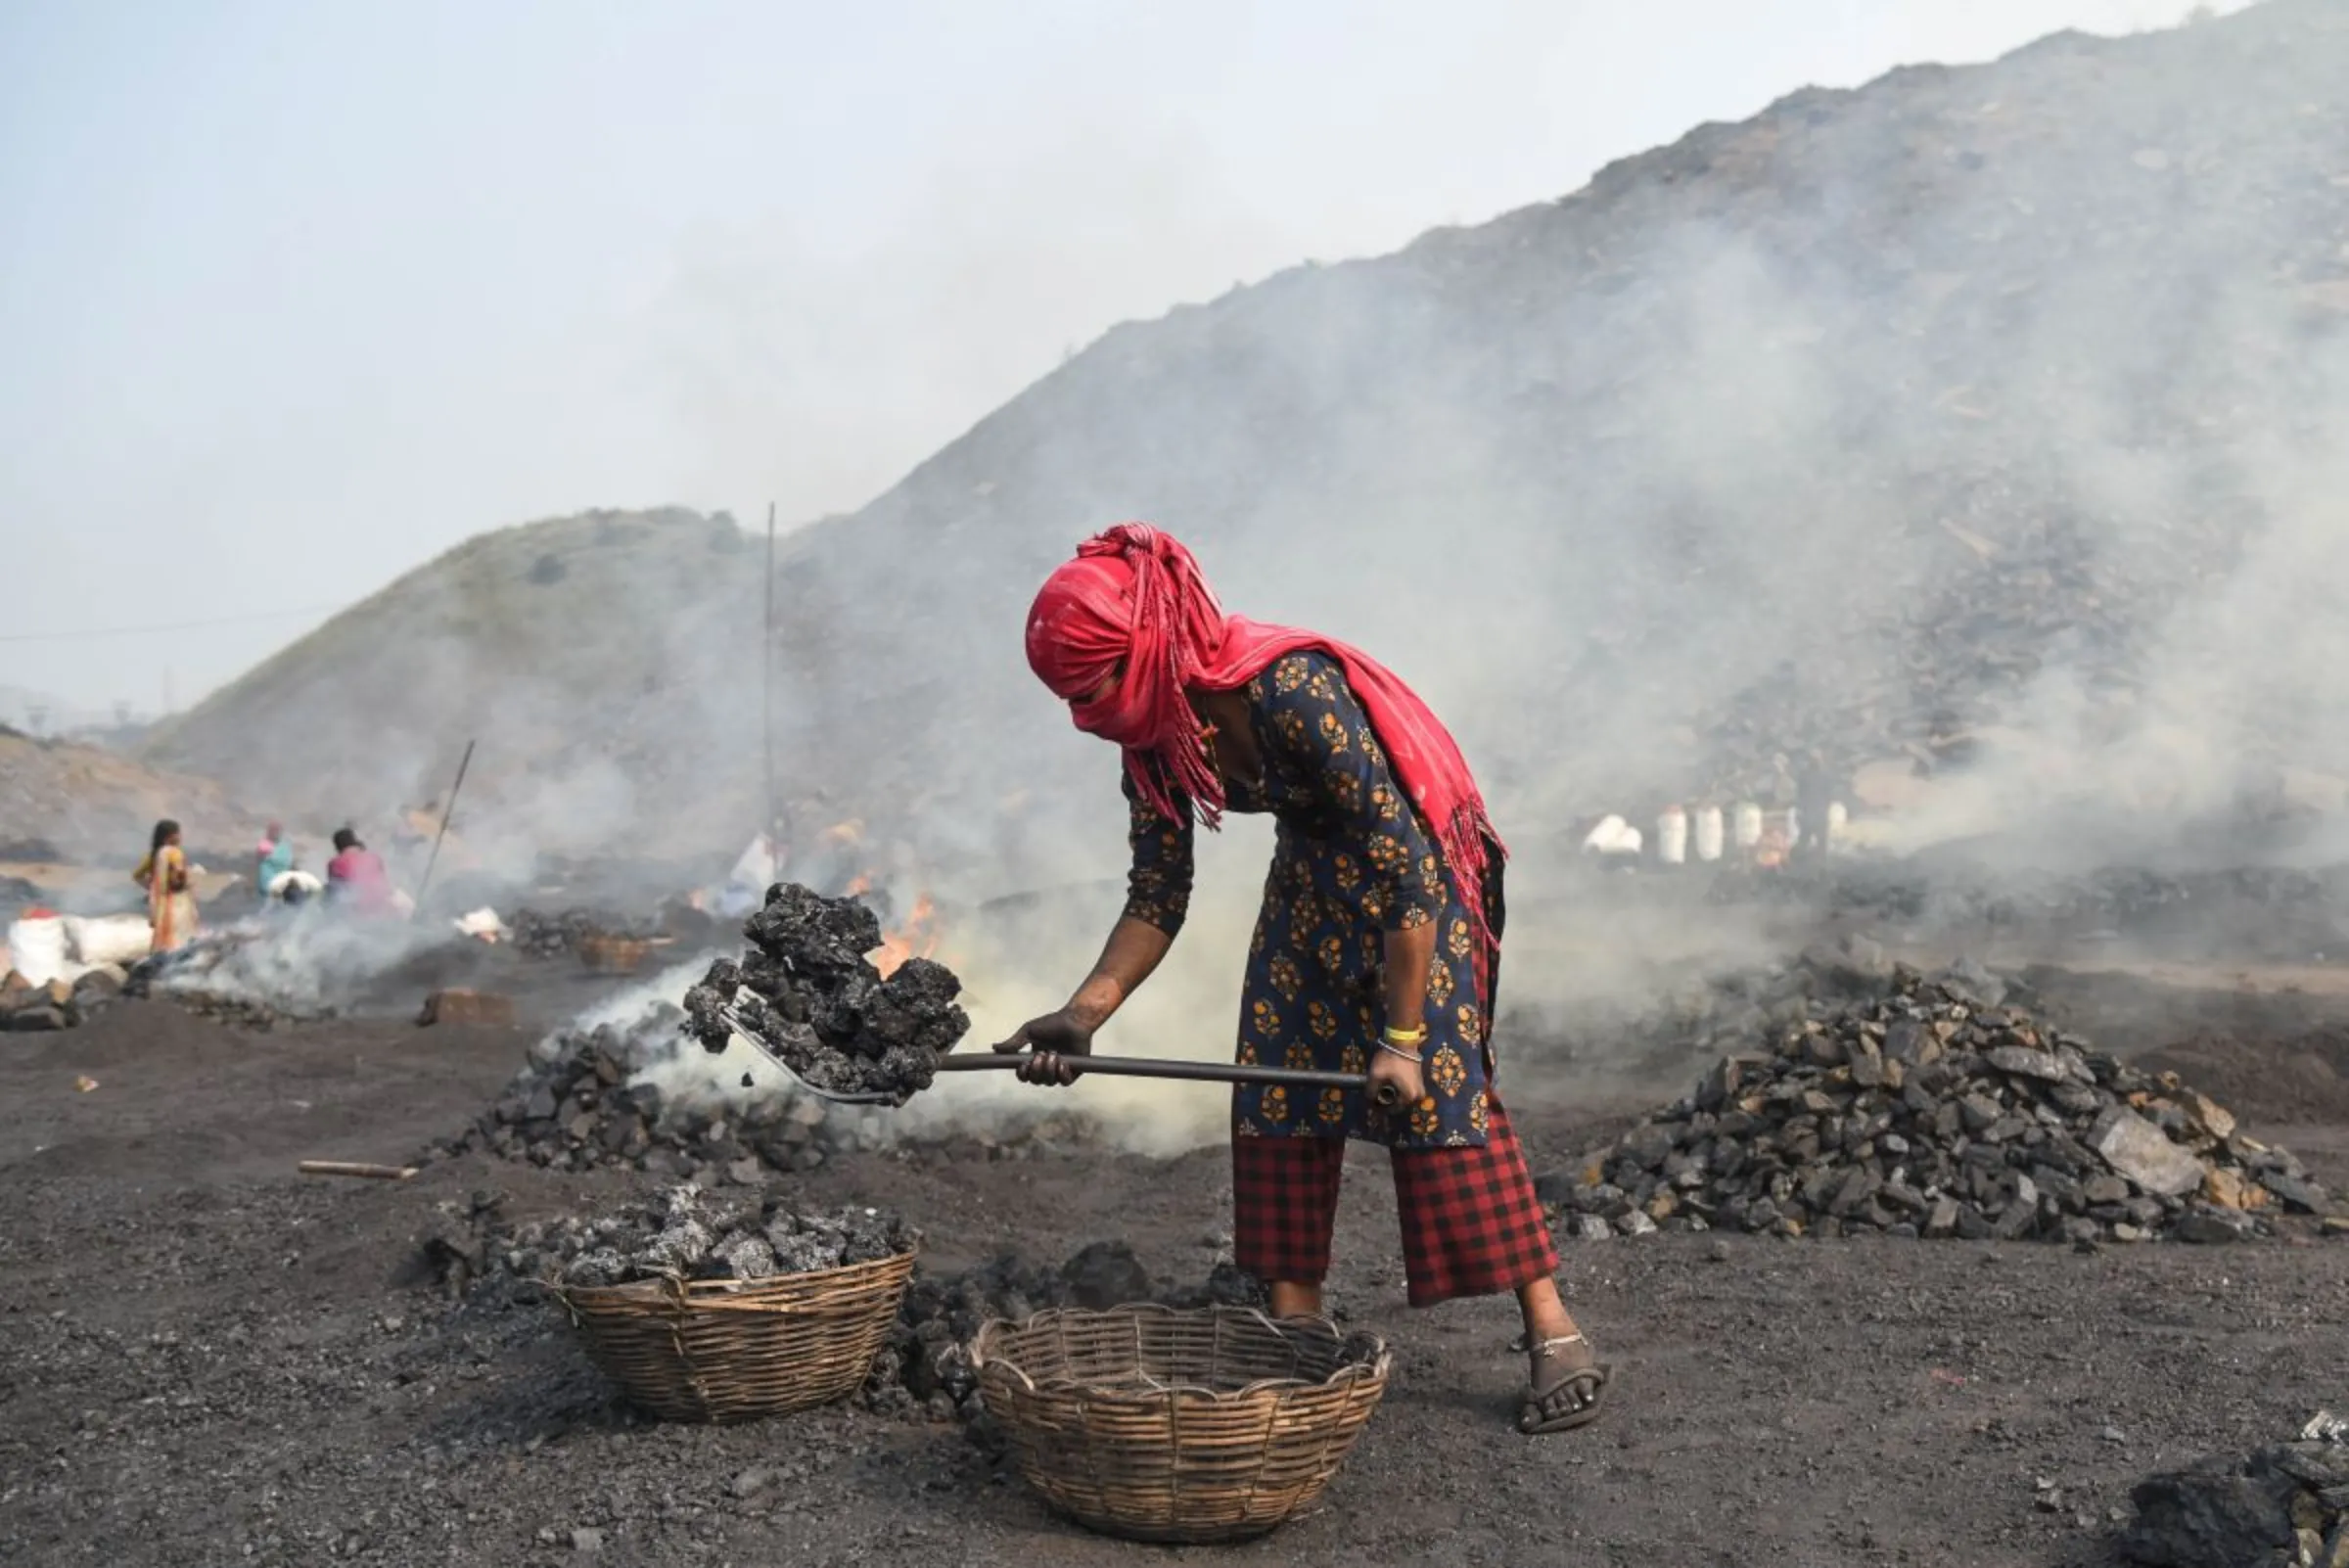 A child coal scavenger burns coal before selling it for use at a depot in a mining area of Jharia coalfield, India, November 11, 2022. Thomson Reuters Foundation/Tanmoy Bhaduri